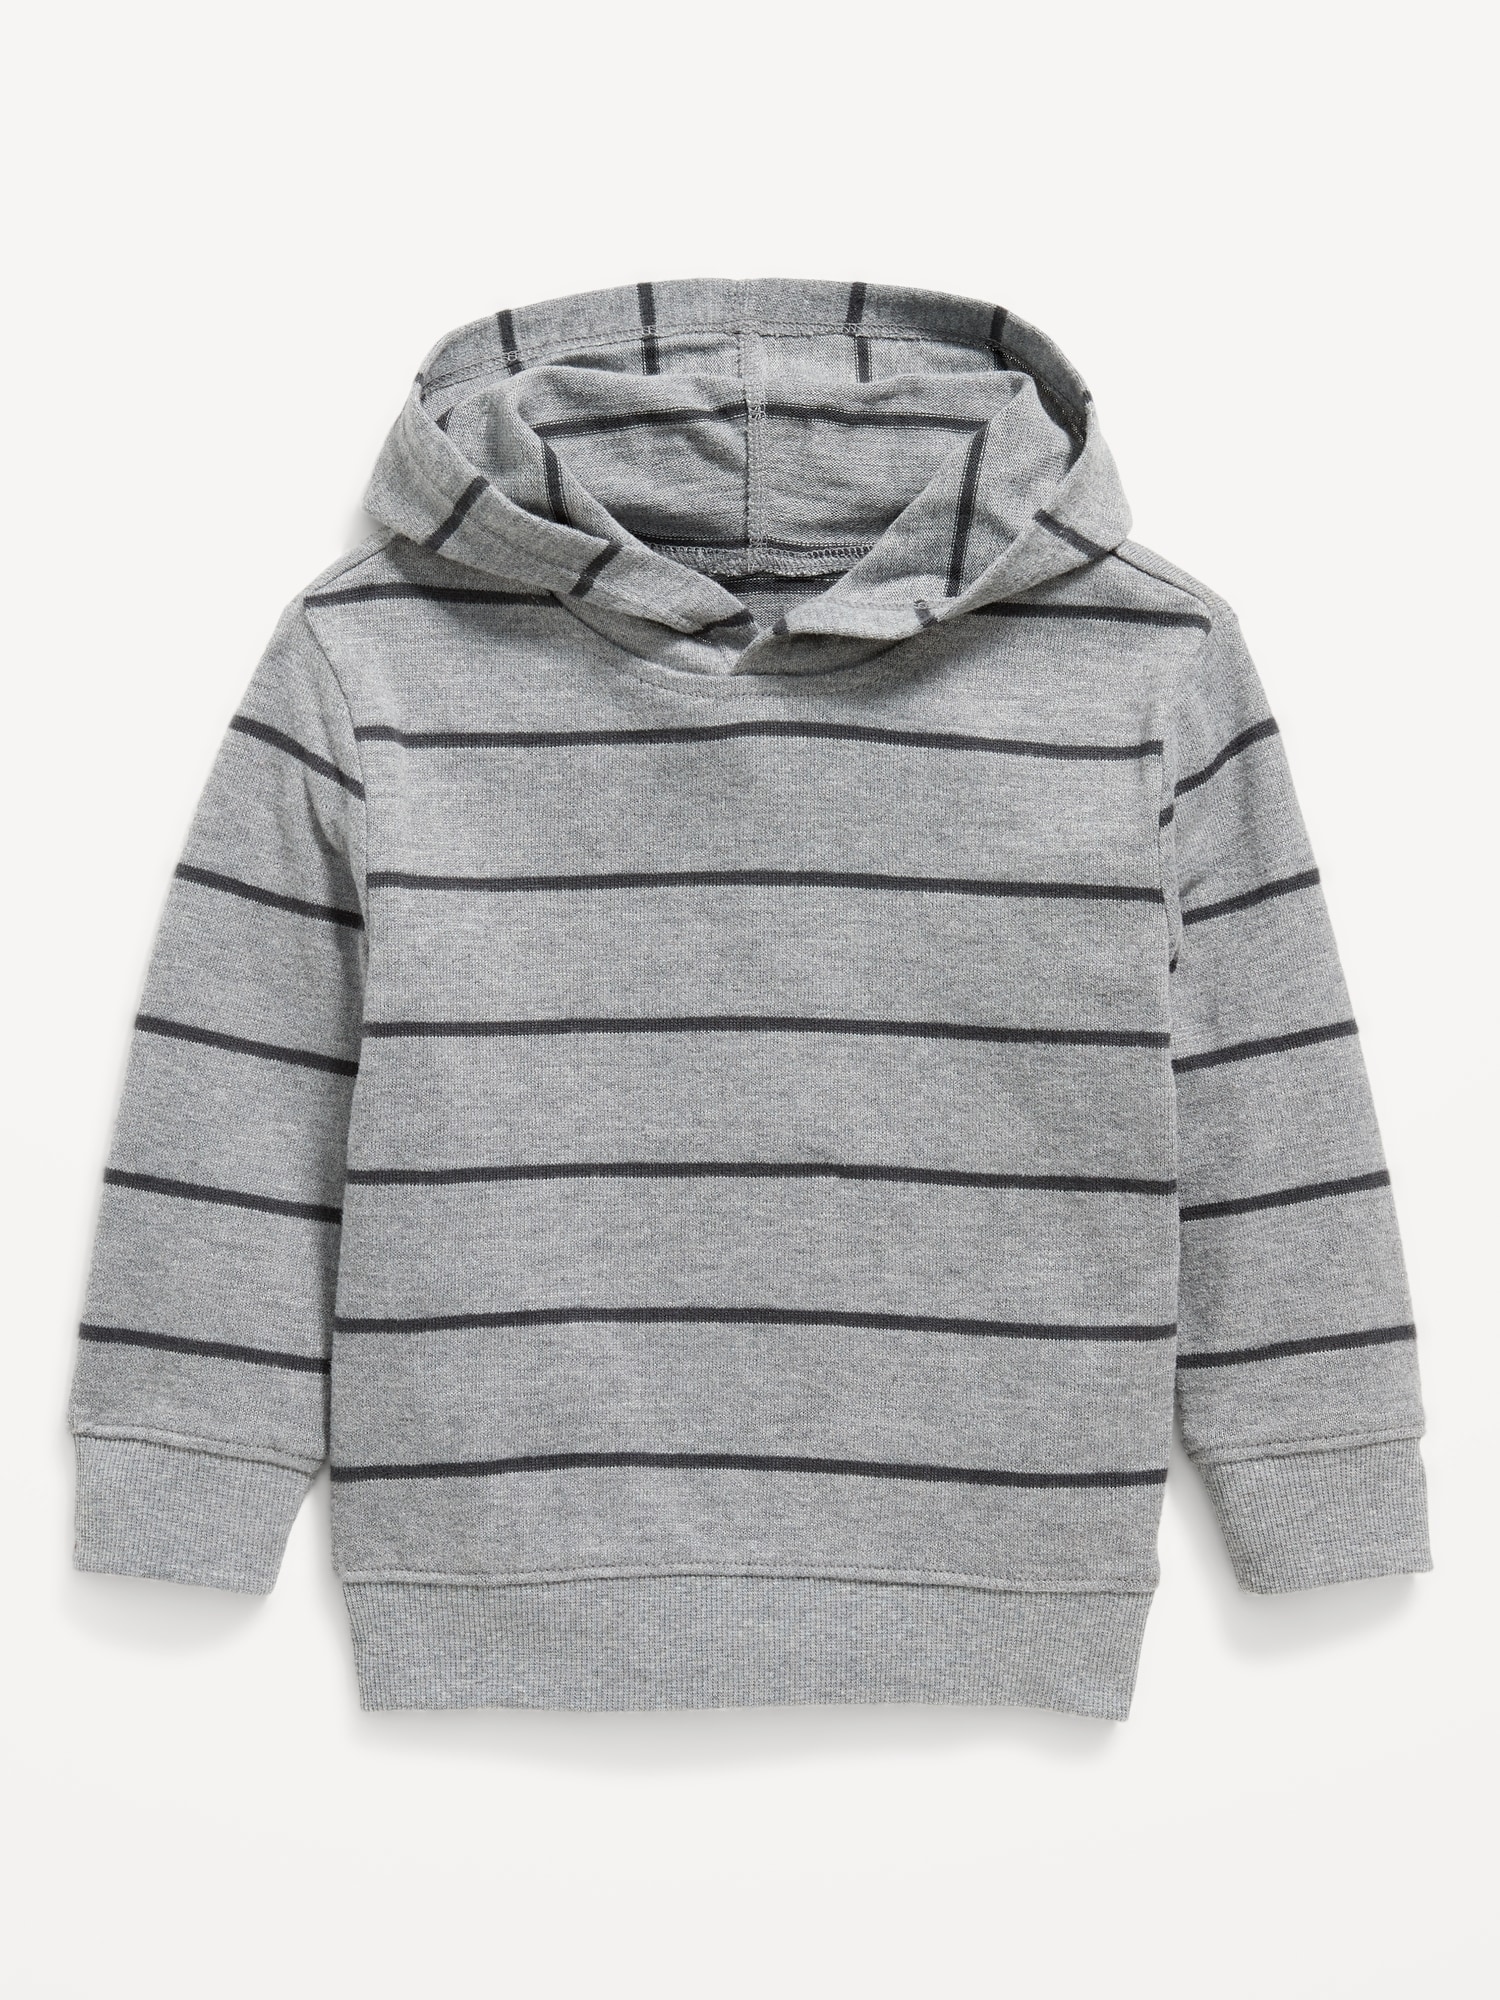 Cozy-Knit Hoodie | Boys Old Toddler for Navy Striped Pullover